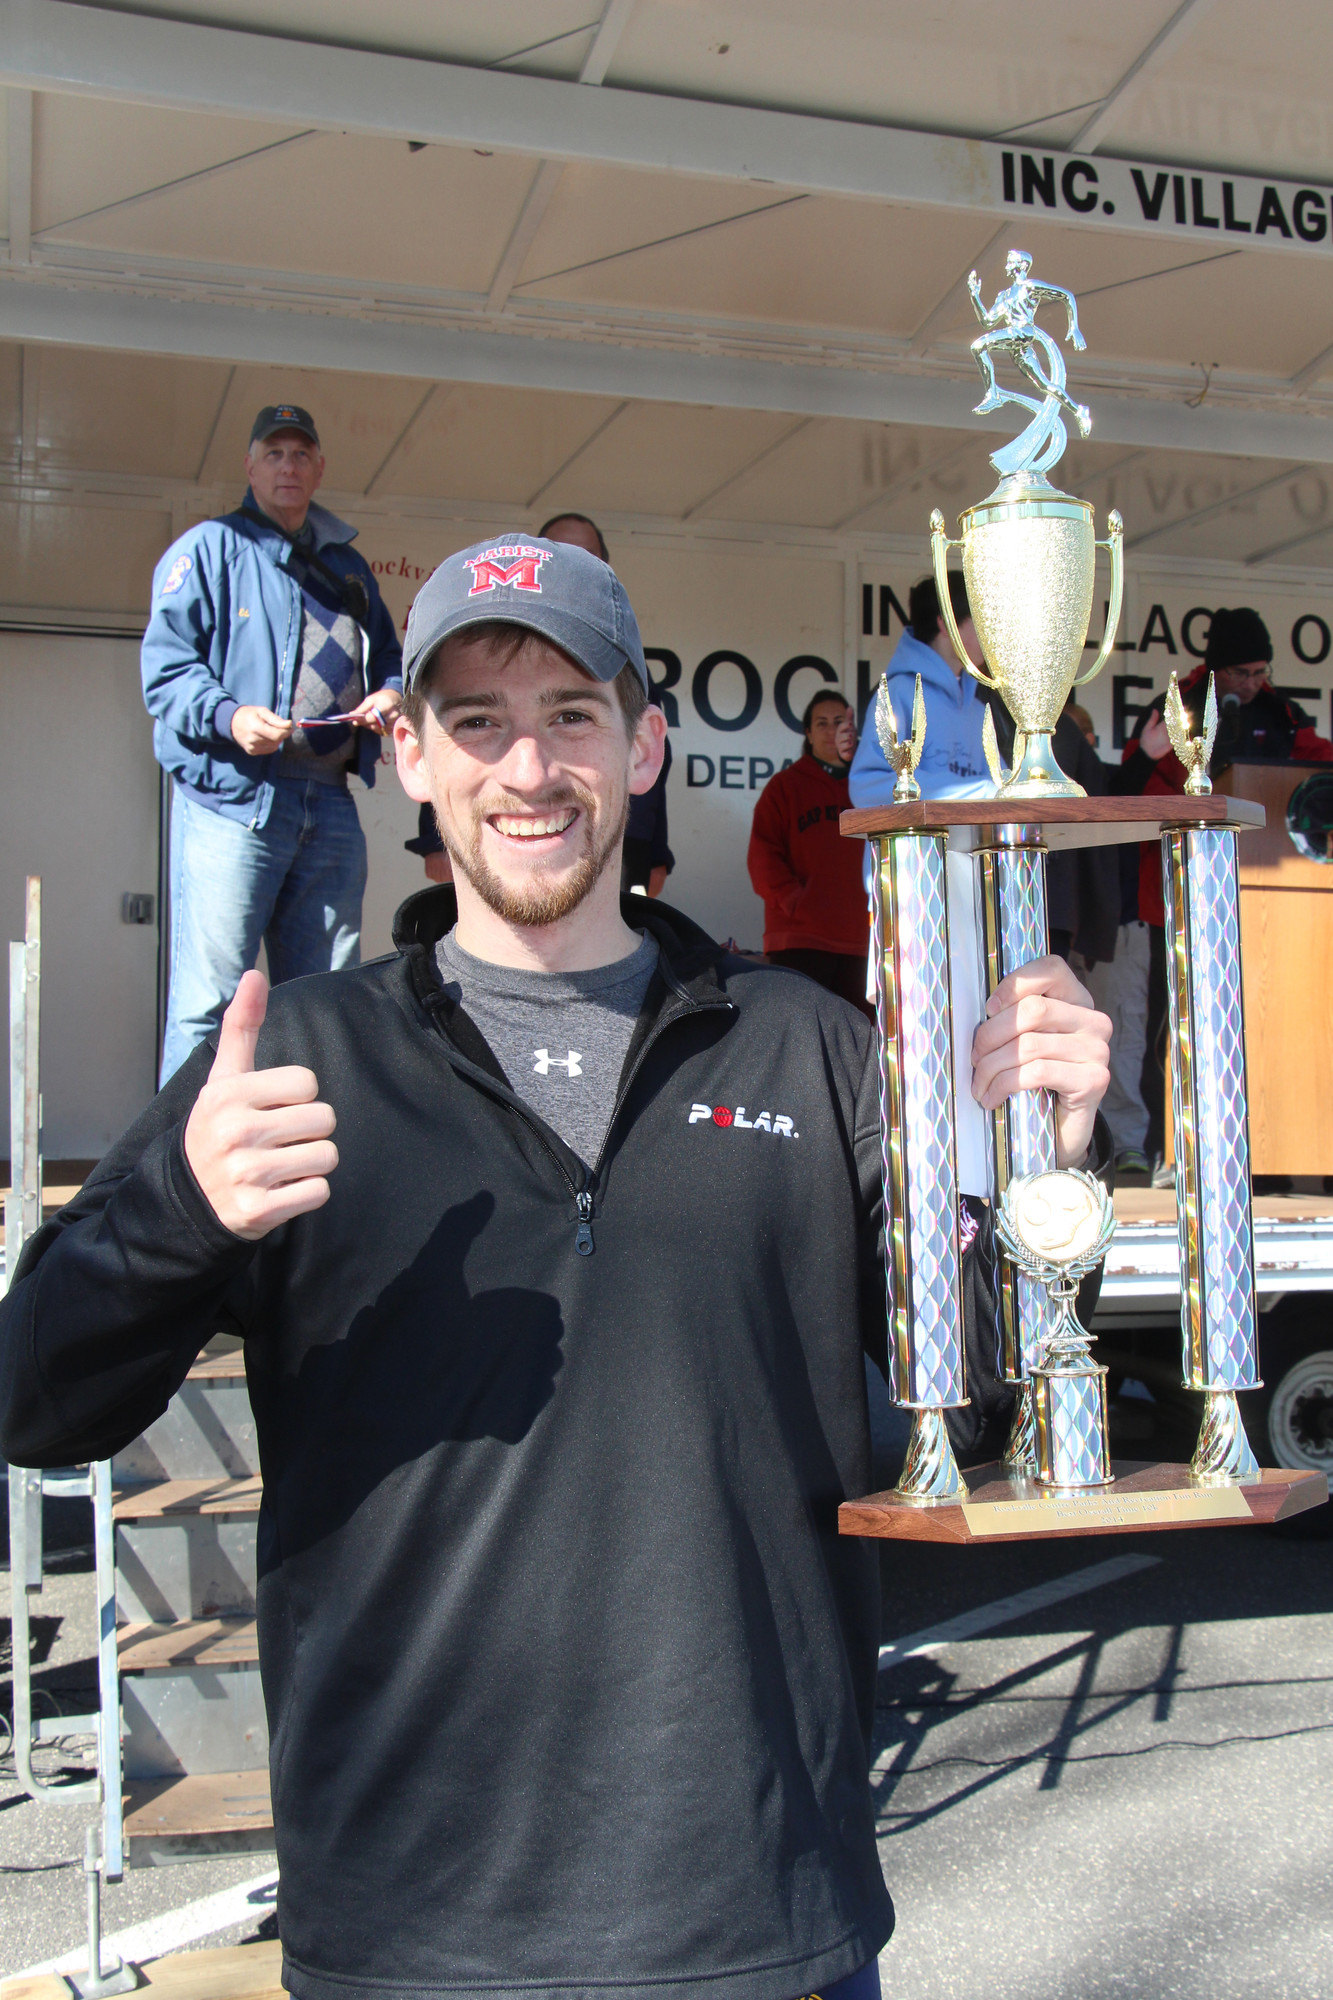 Rockville Centre resident Conor Shelley proudly showed off the trophy he won for finishing first in the 10K.